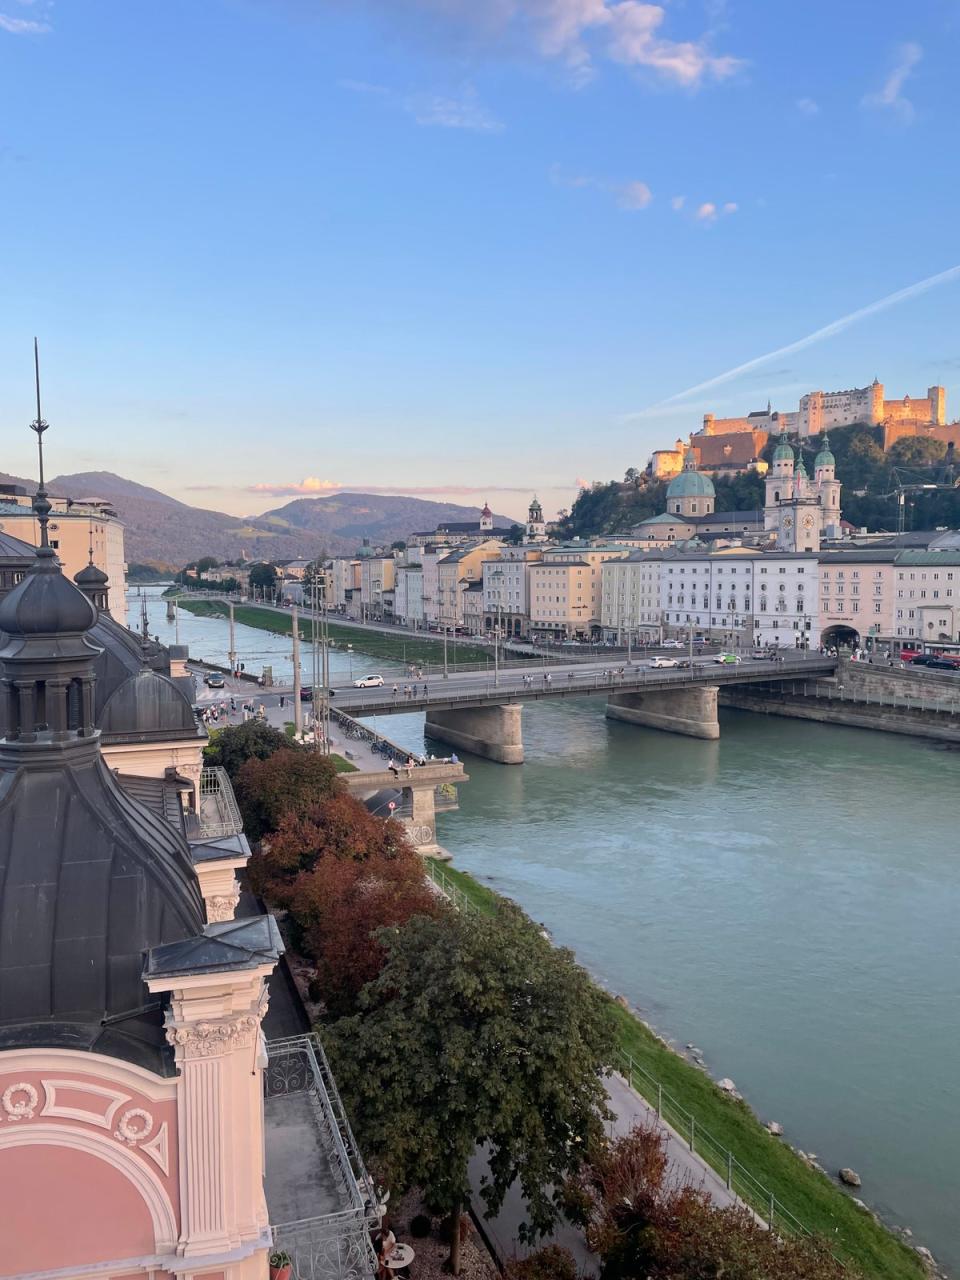 The views of the Fortress Hohensalzburg from a suite at Hotel Sacher Salzburg (Rachel Sharp)